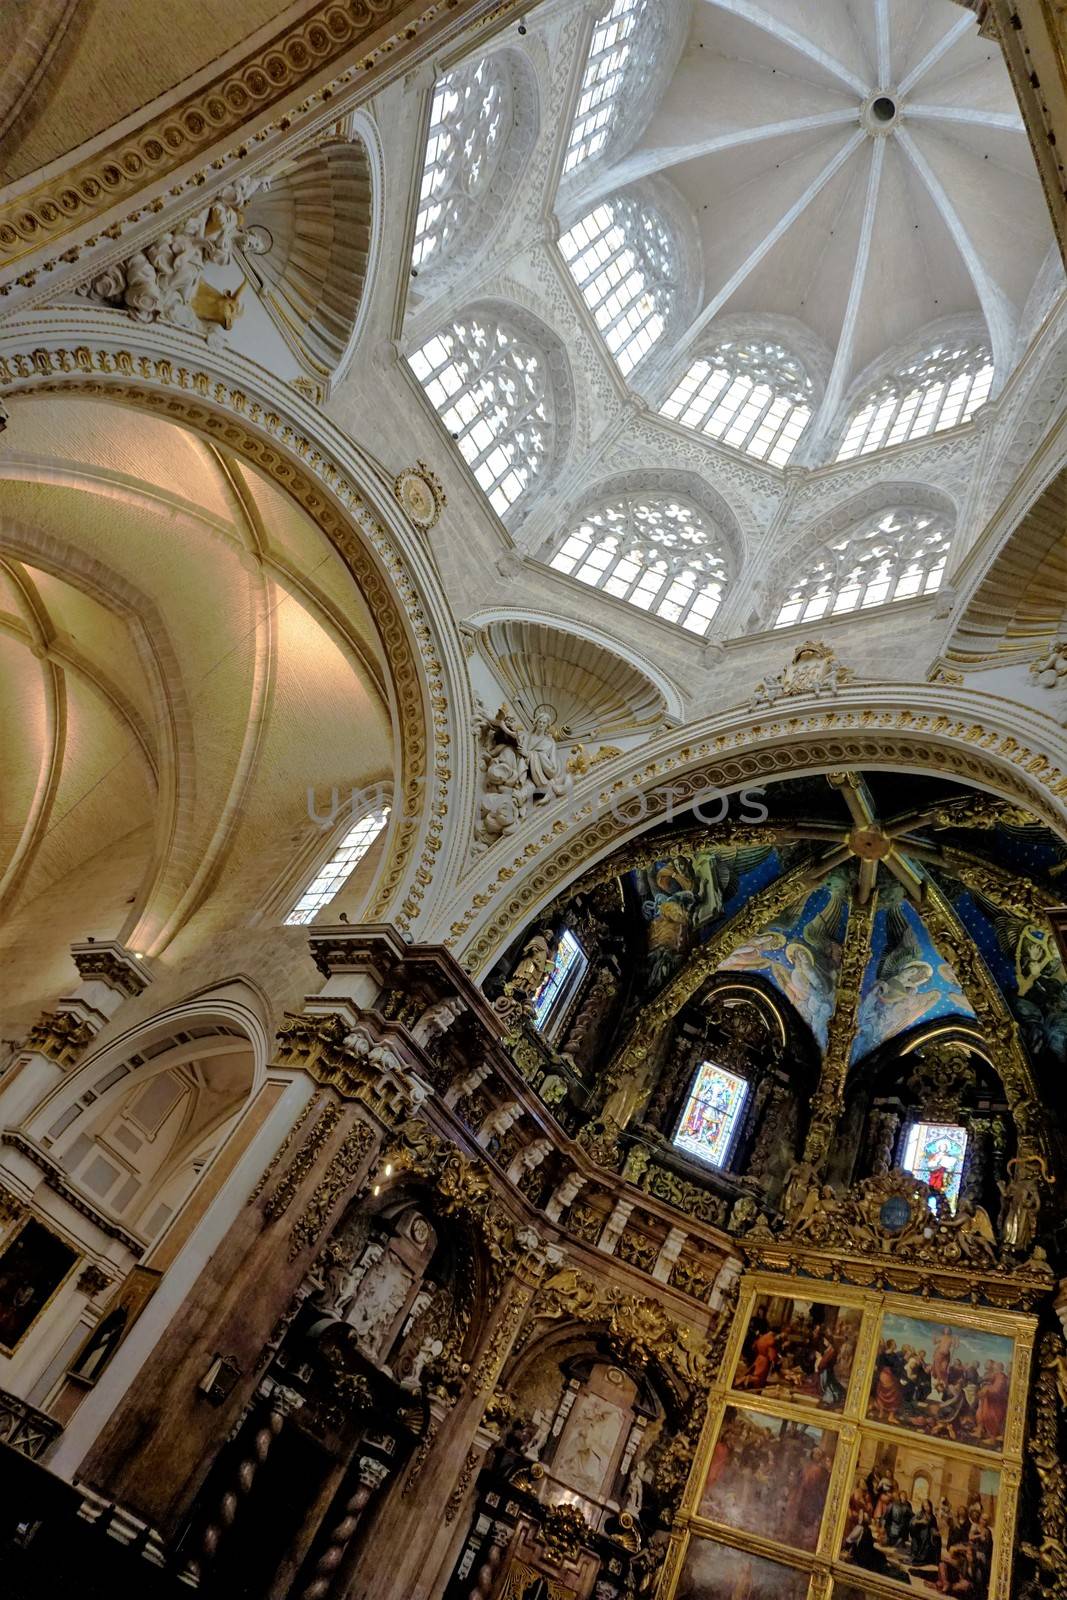 Chancel and cupola of the Valencia cathedral by pisces2386